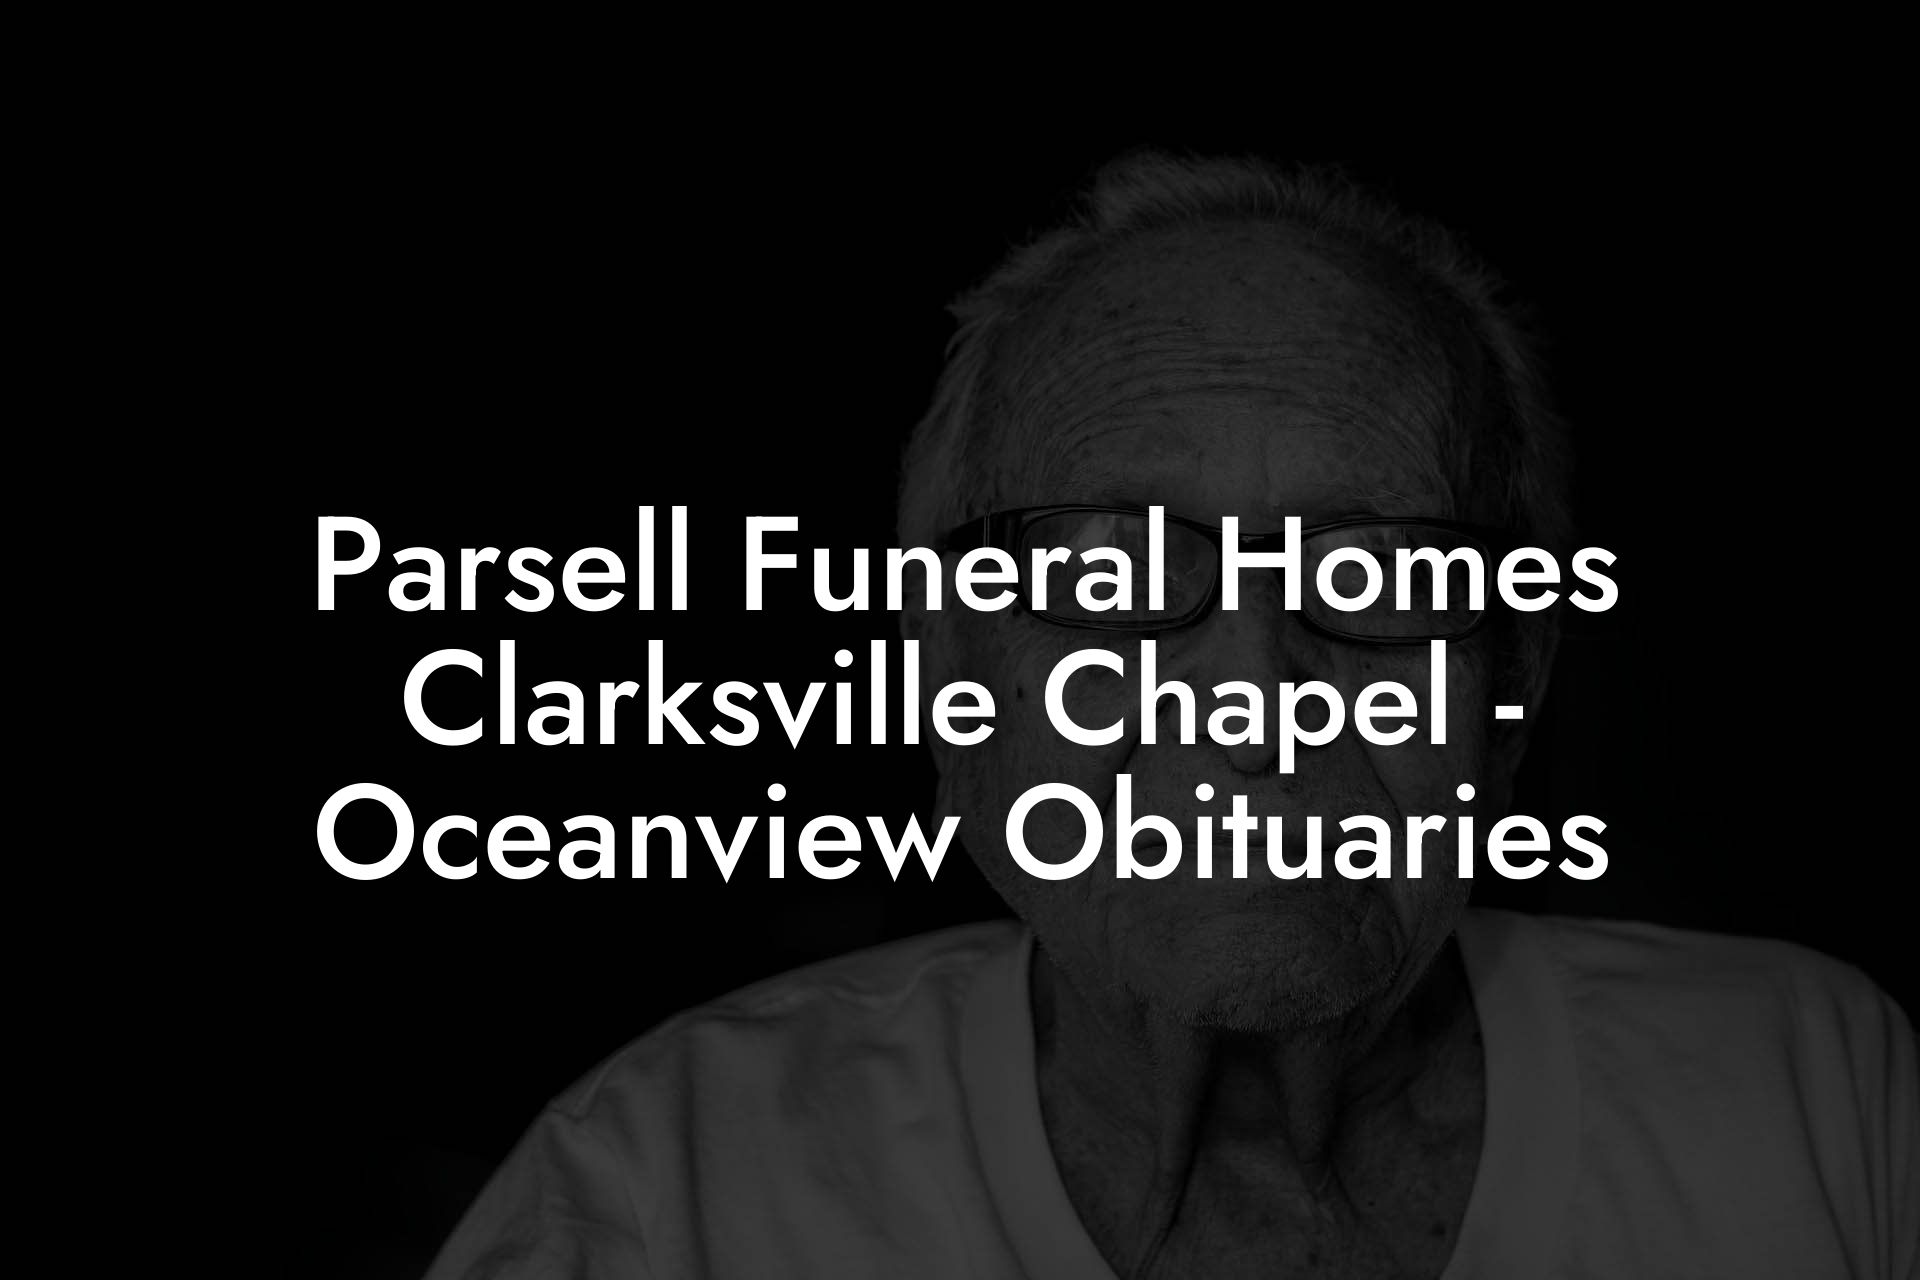 Parsell Funeral Homes Clarksville Chapel - Oceanview Obituaries